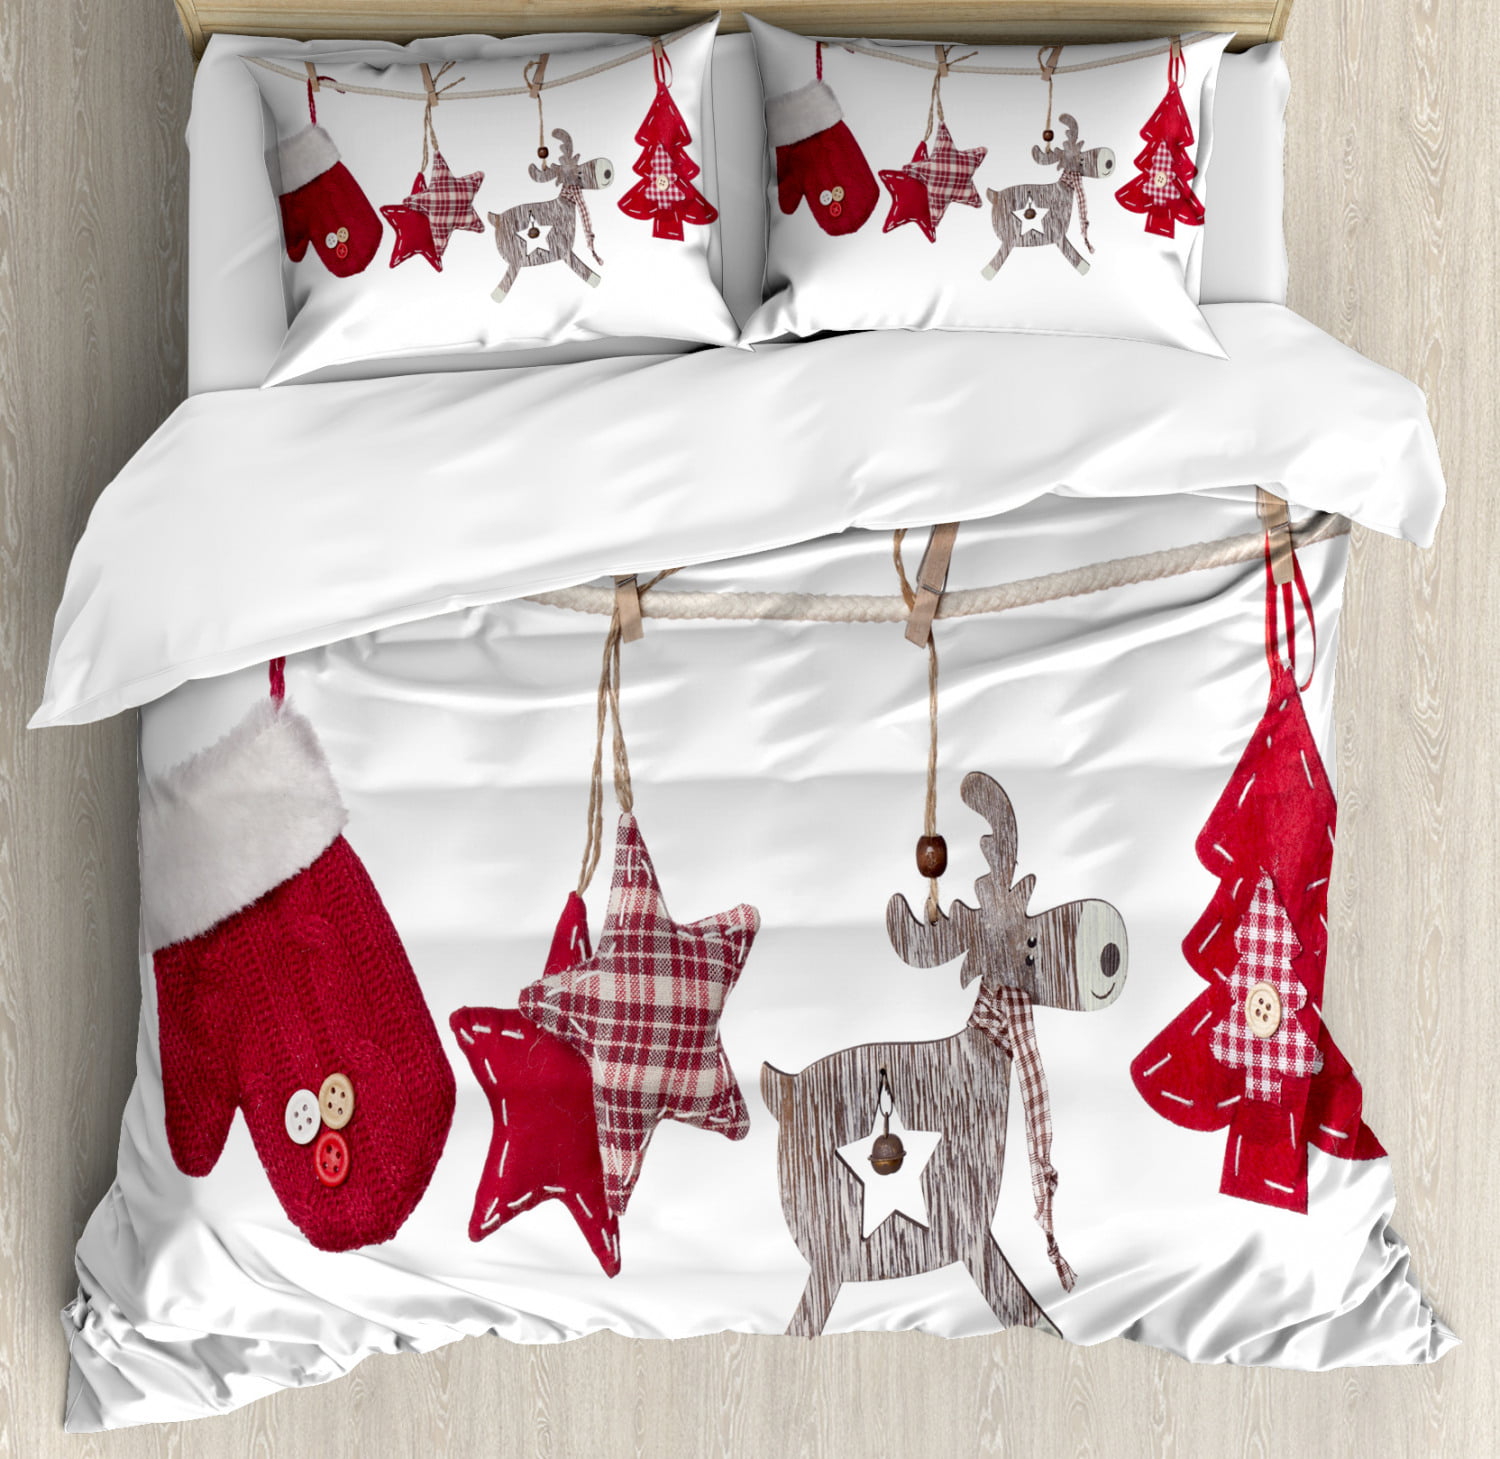 Ambesonne Christmas Duvet Cover Set King Size Red Green Red Retro Style Car Xmas Tree Vintage Family Style Illustration Snowy Winter Art Decorative 3 Piece Bedding Set with 2 Pillow Shams